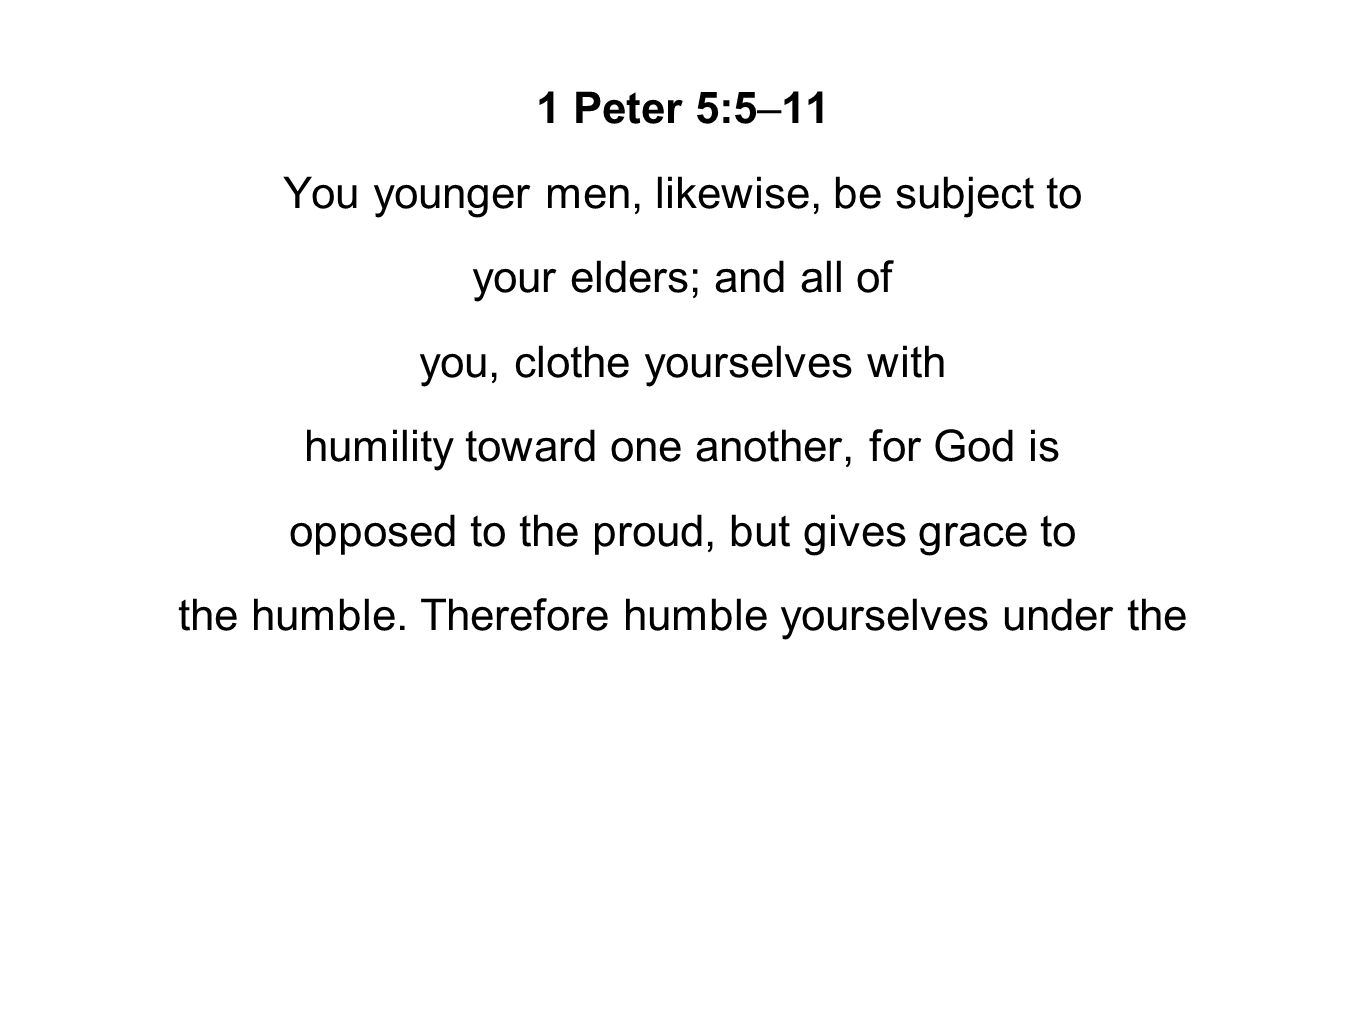 1 Peter 5:5–11 You younger men, likewise, be subject to your elders; and all of you, clothe yourselves with humility toward one another, for God is opposed to the proud, but gives grace to the humble.